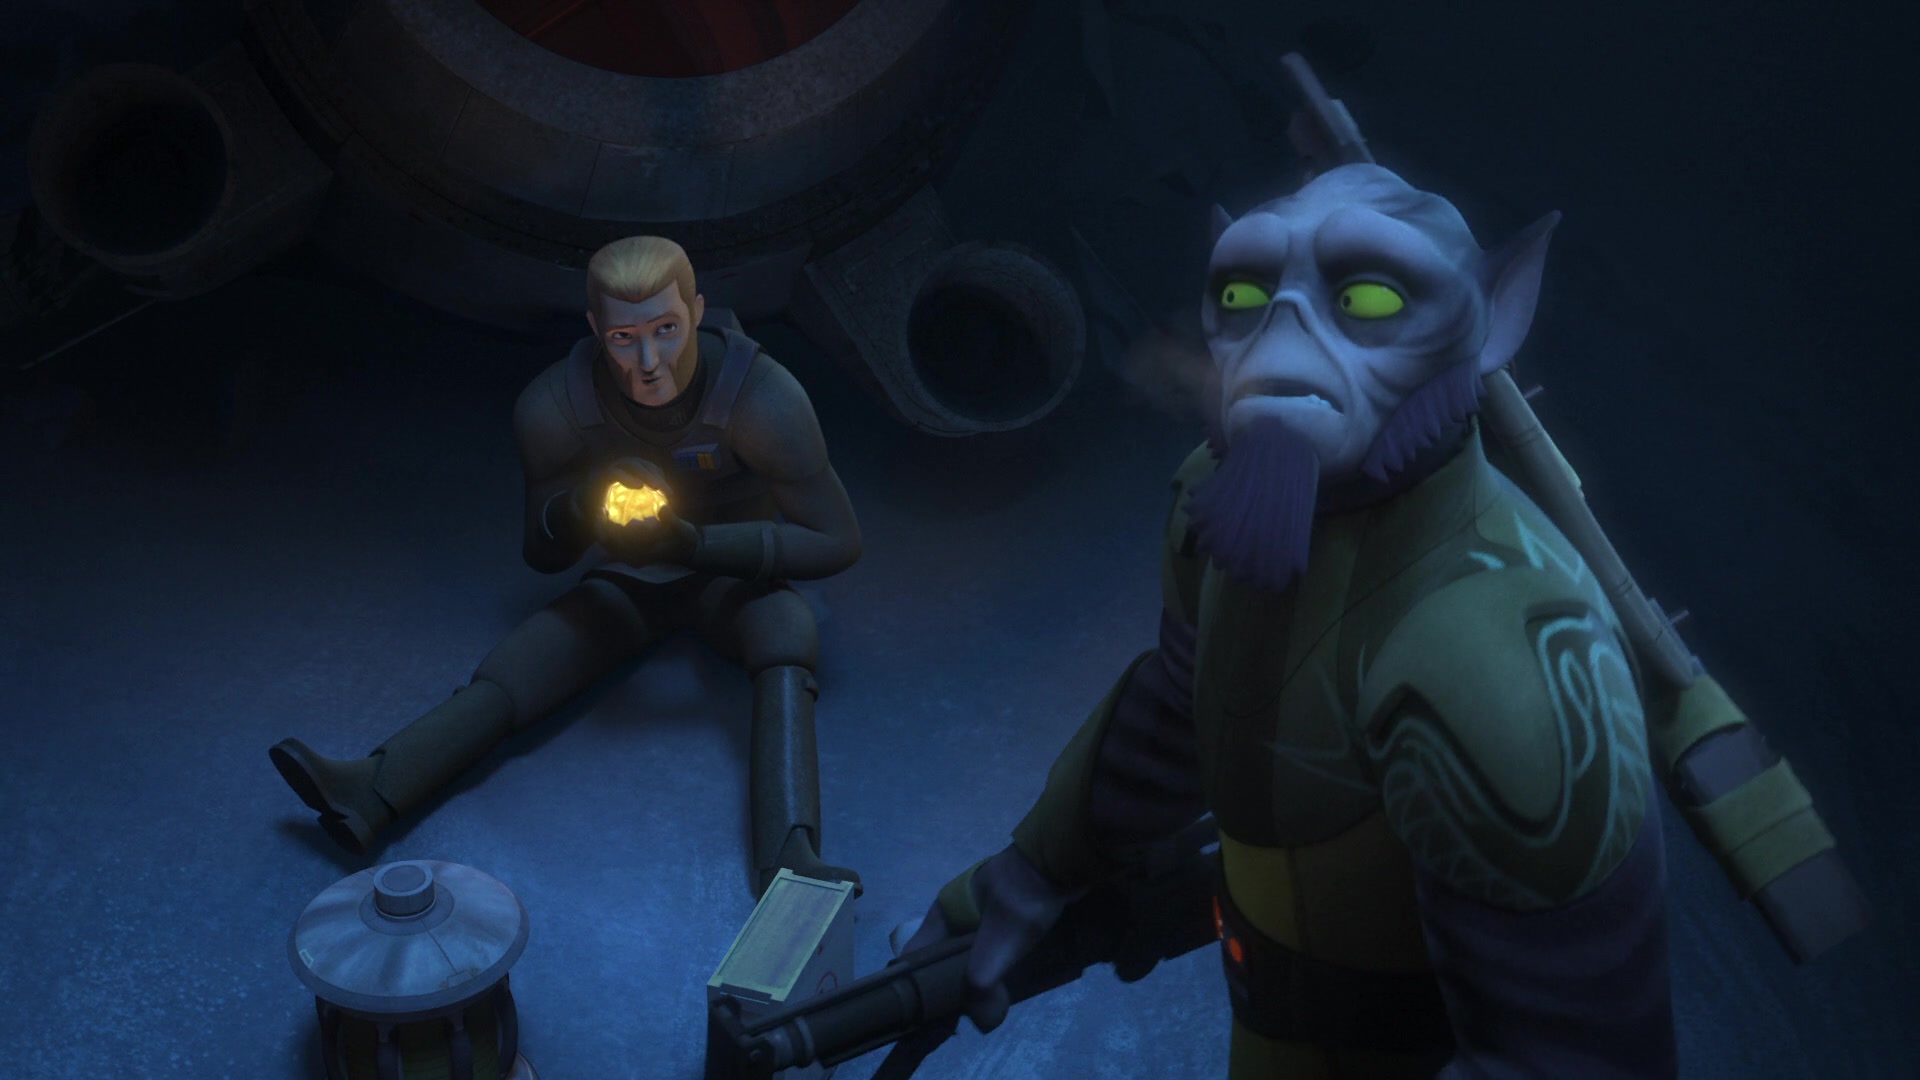 Zeb (Steve Blum) realizes he needs to work together with Agent Kallus (David Oyelowo) in Star Wars Rebels Season 2 Episode 17 "The Honorable Ones" (2016), Lucasfilm